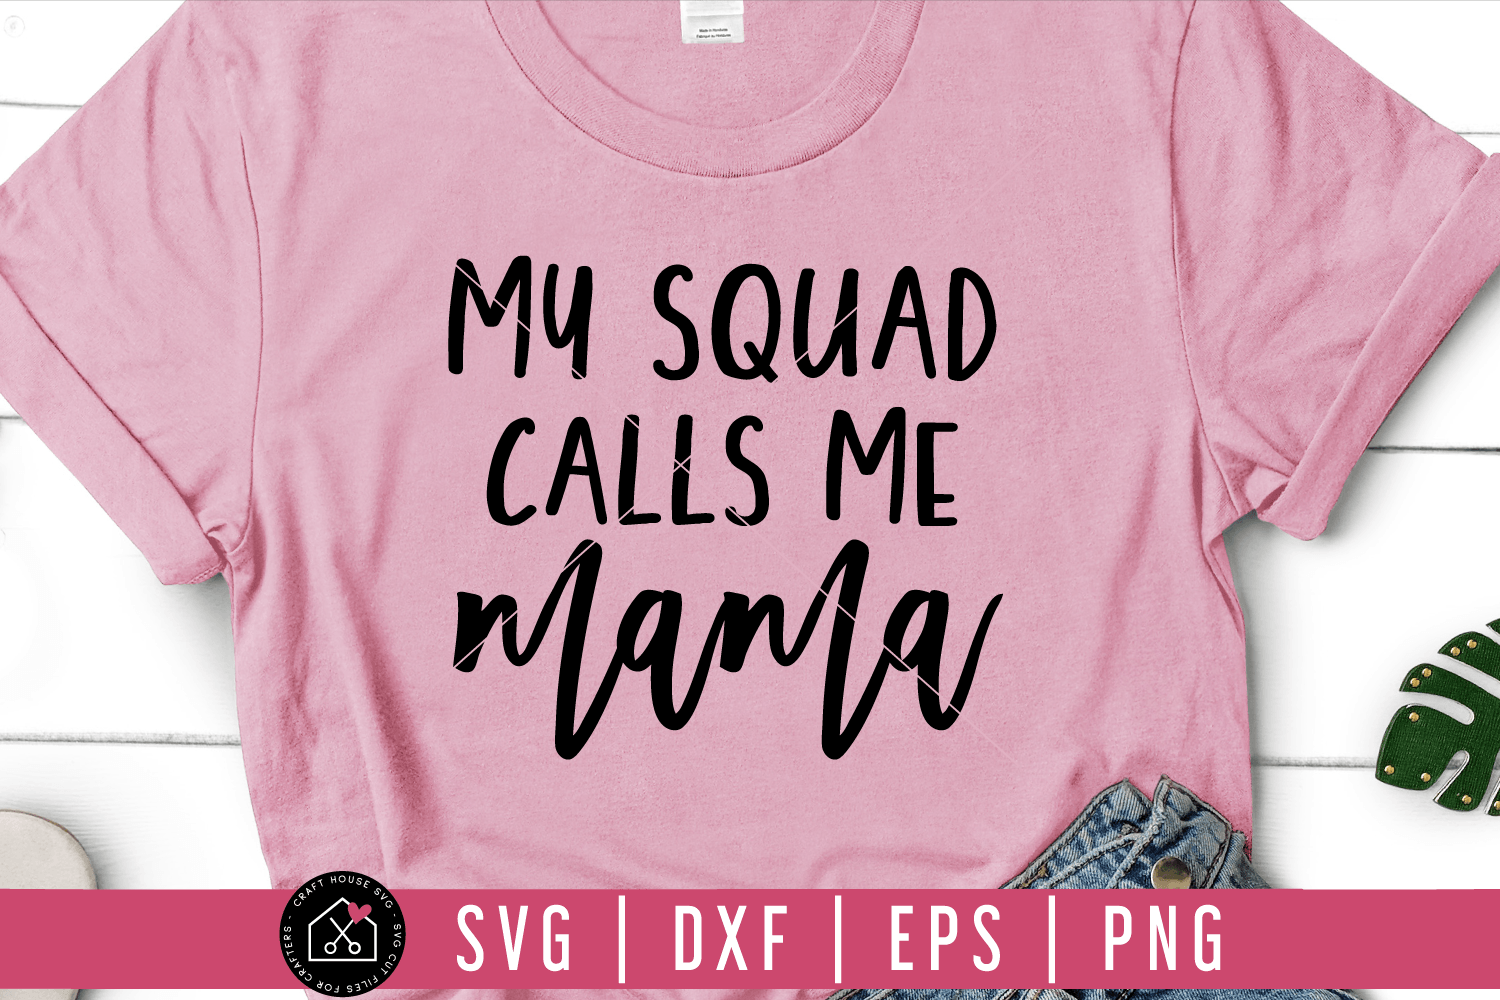 My squad calls me mama SVG | M54F Craft House SVG - SVG files for Cricut and Silhouette